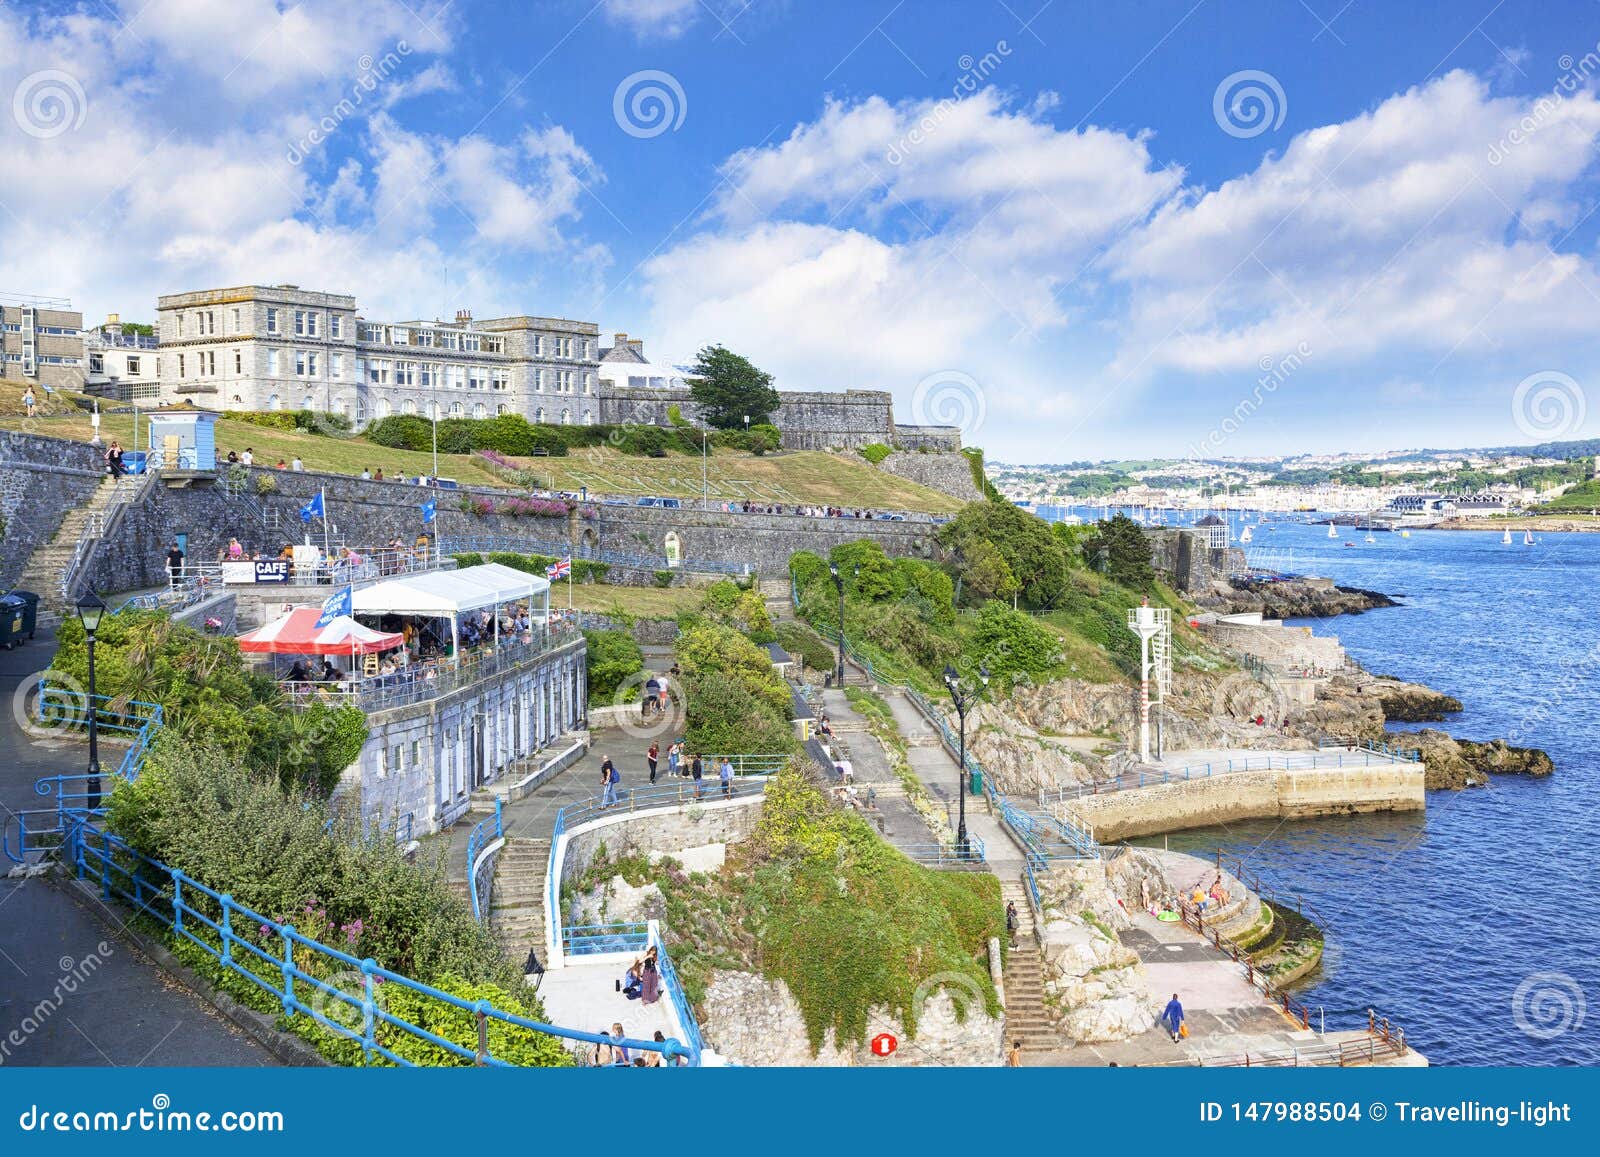 Plymouth Waterfront Devon UK Editorial Stock Image - Image of costal